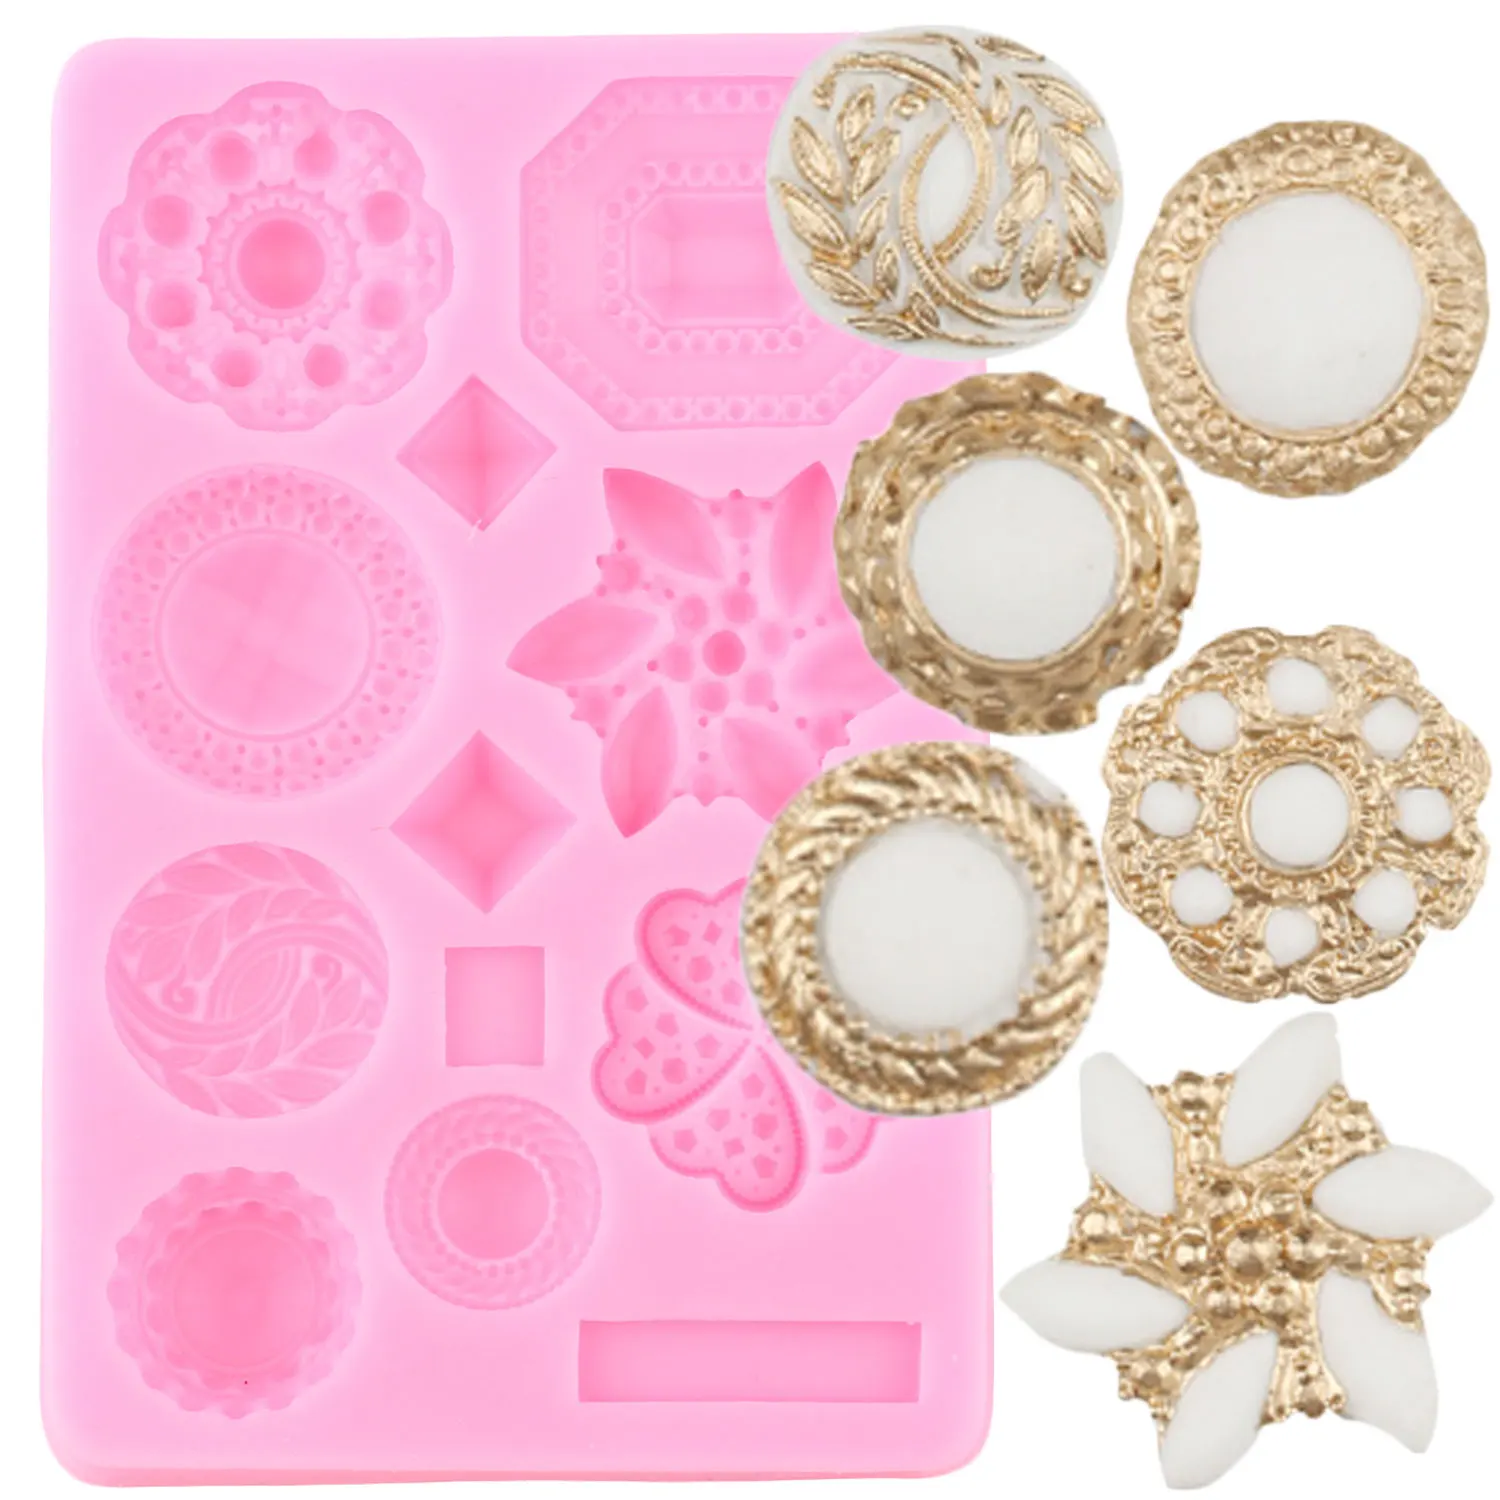 

Jewelry Gems Silicone Mold Cupcake Topper Fondant Molds DIY Wedding Cake Decorating Tools Chocolate Gumpaste Moulds Candy Mould